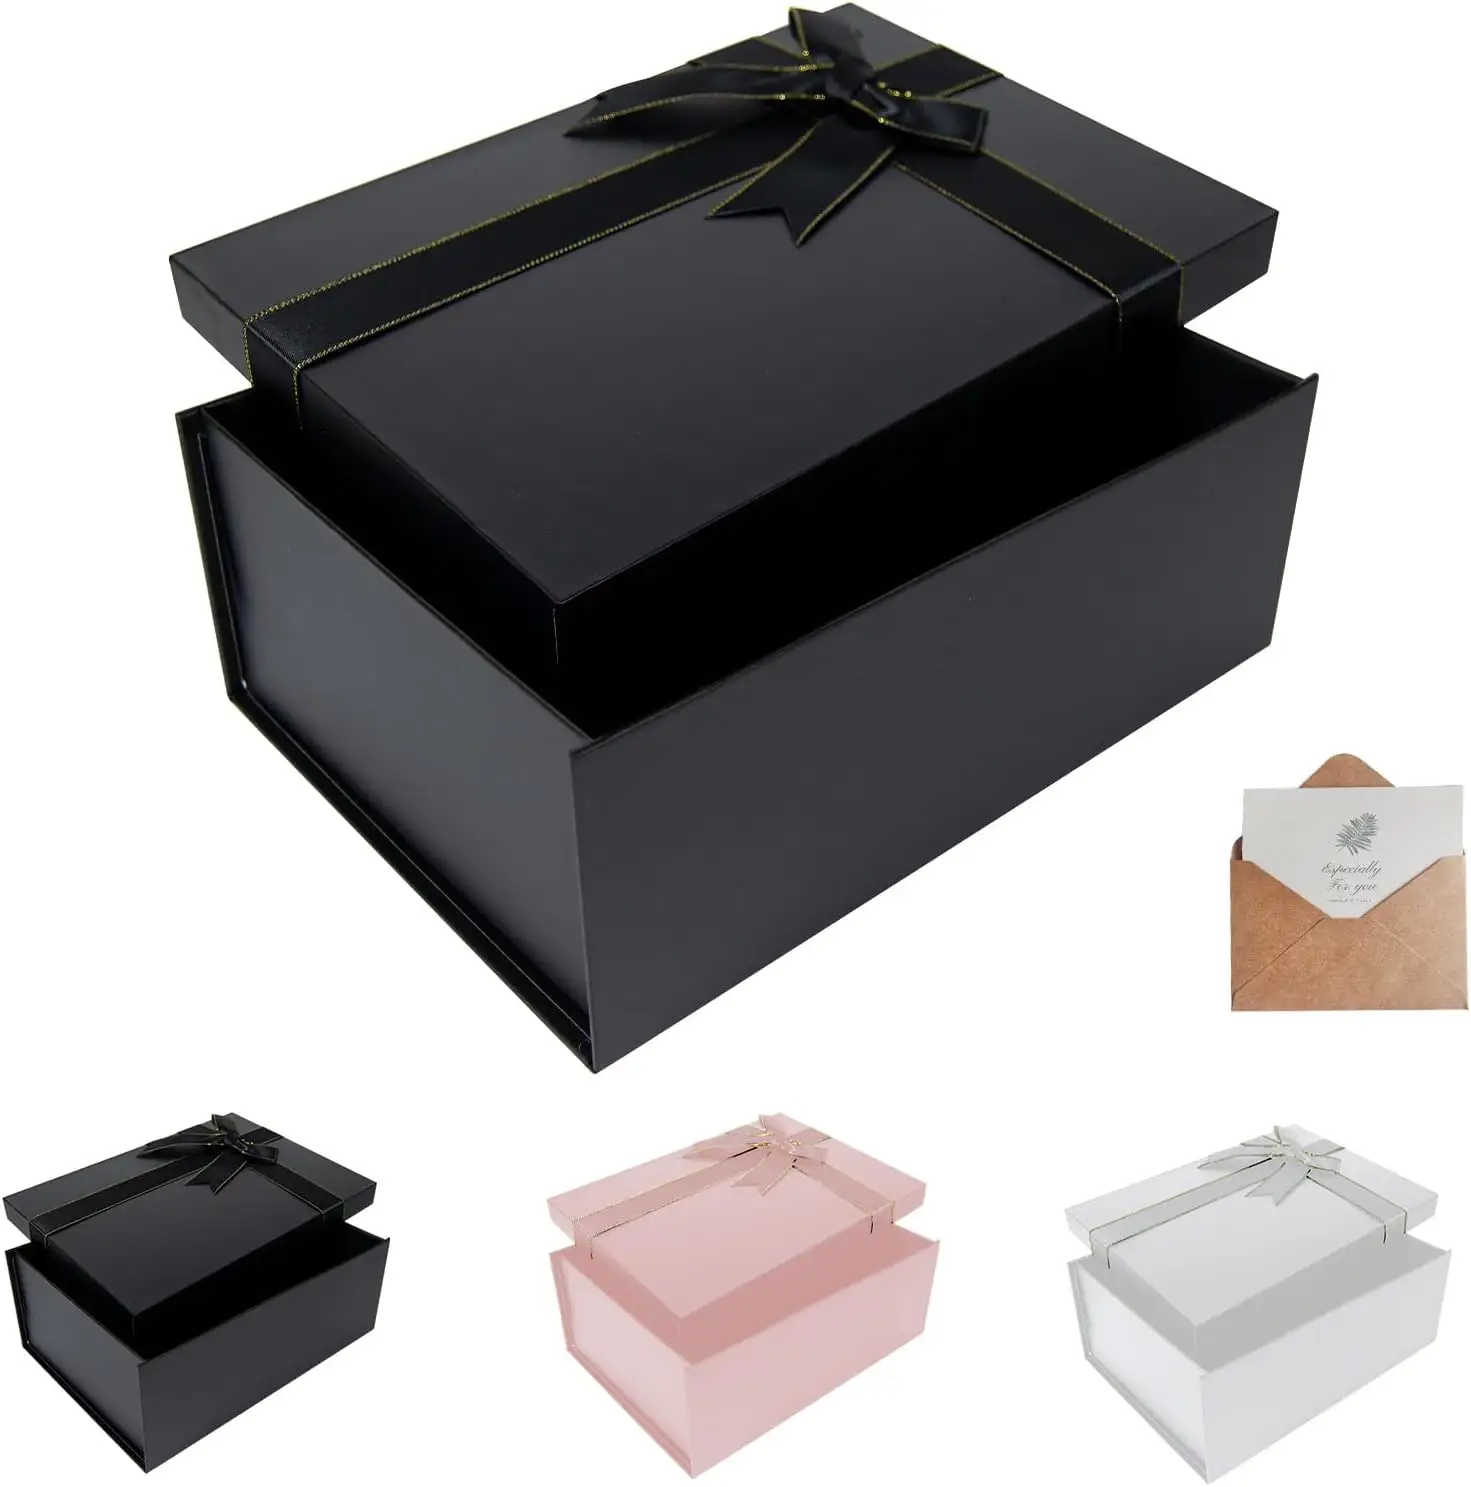 Black Gift box with Lid Gift Jewelry Package Box with Greeting Cards Suitable for Storing Your Gifts on Birthdays Christmas